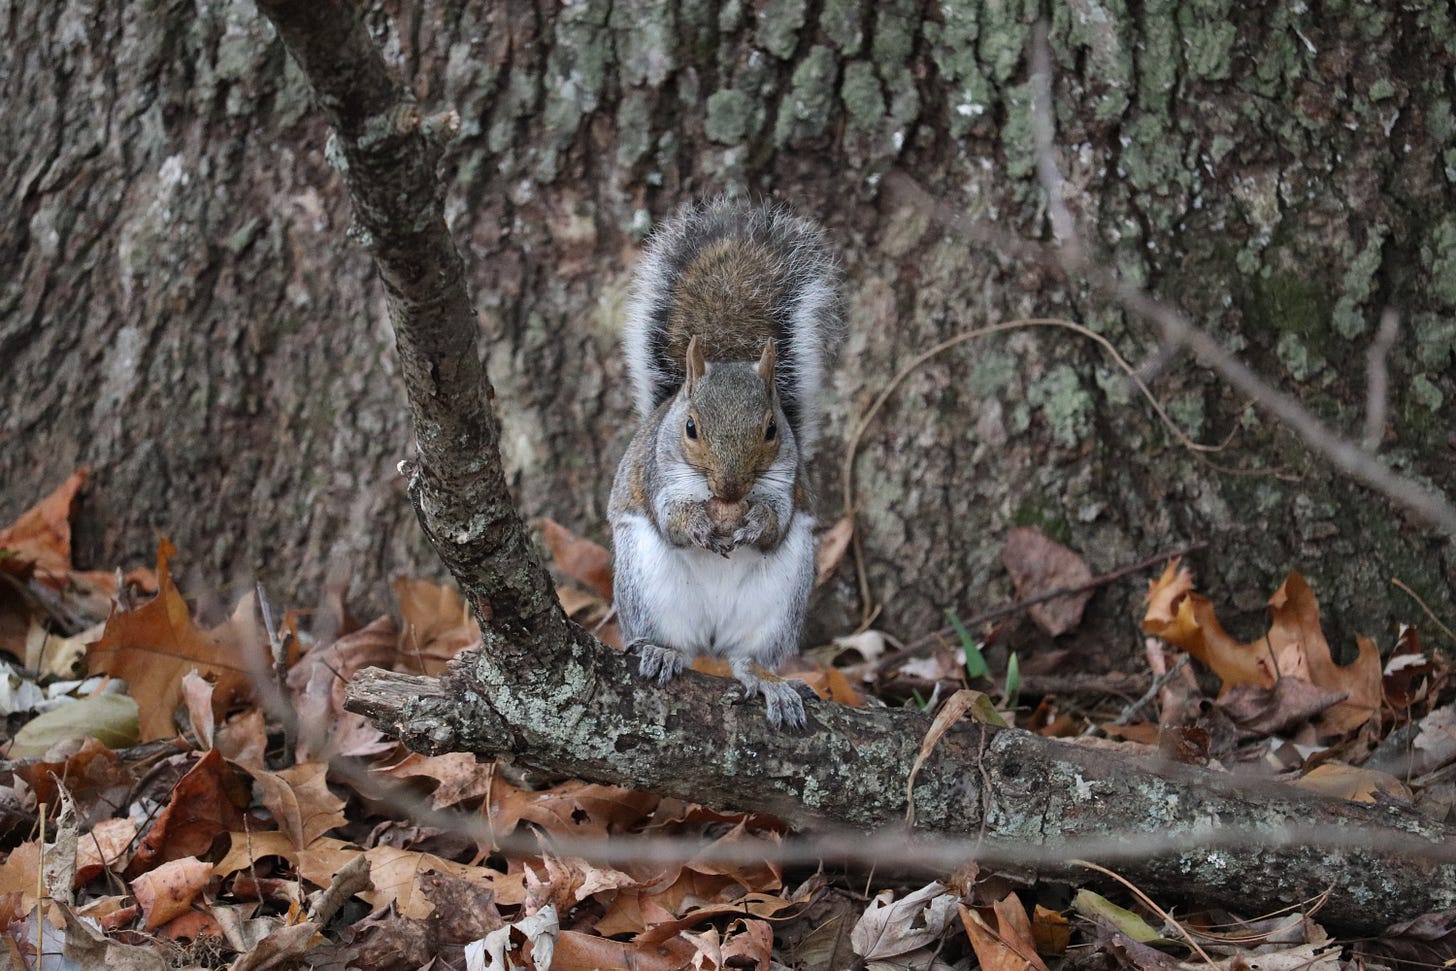 A grey squirrel sits on a fallen branch, eating an acorn. There are fallen crisp leaves around it and the bark of a large tree trunk is in the background.